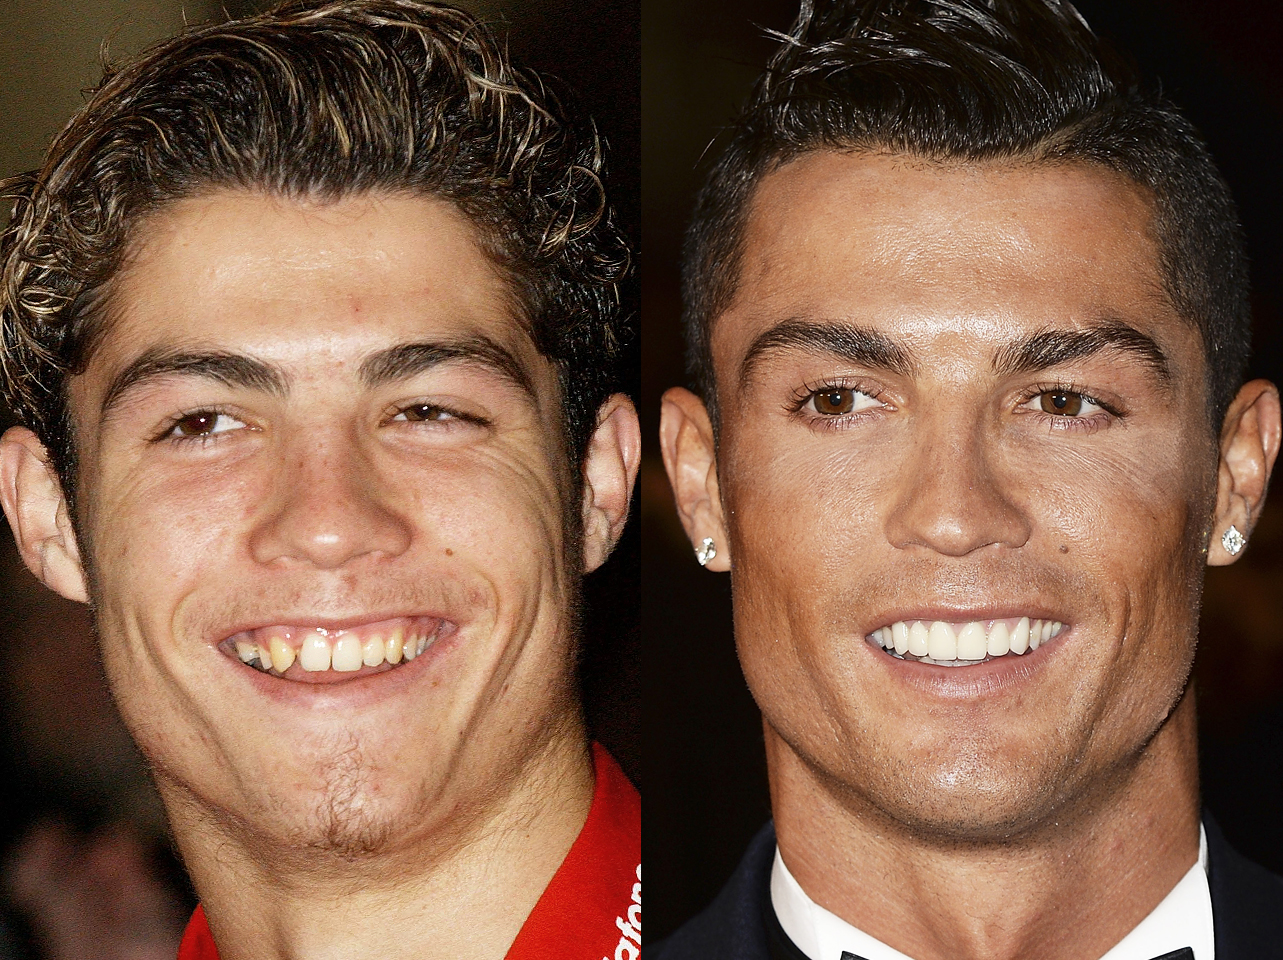 A before and after of Cristiano Ronaldo's smile. | Source: Getty Images